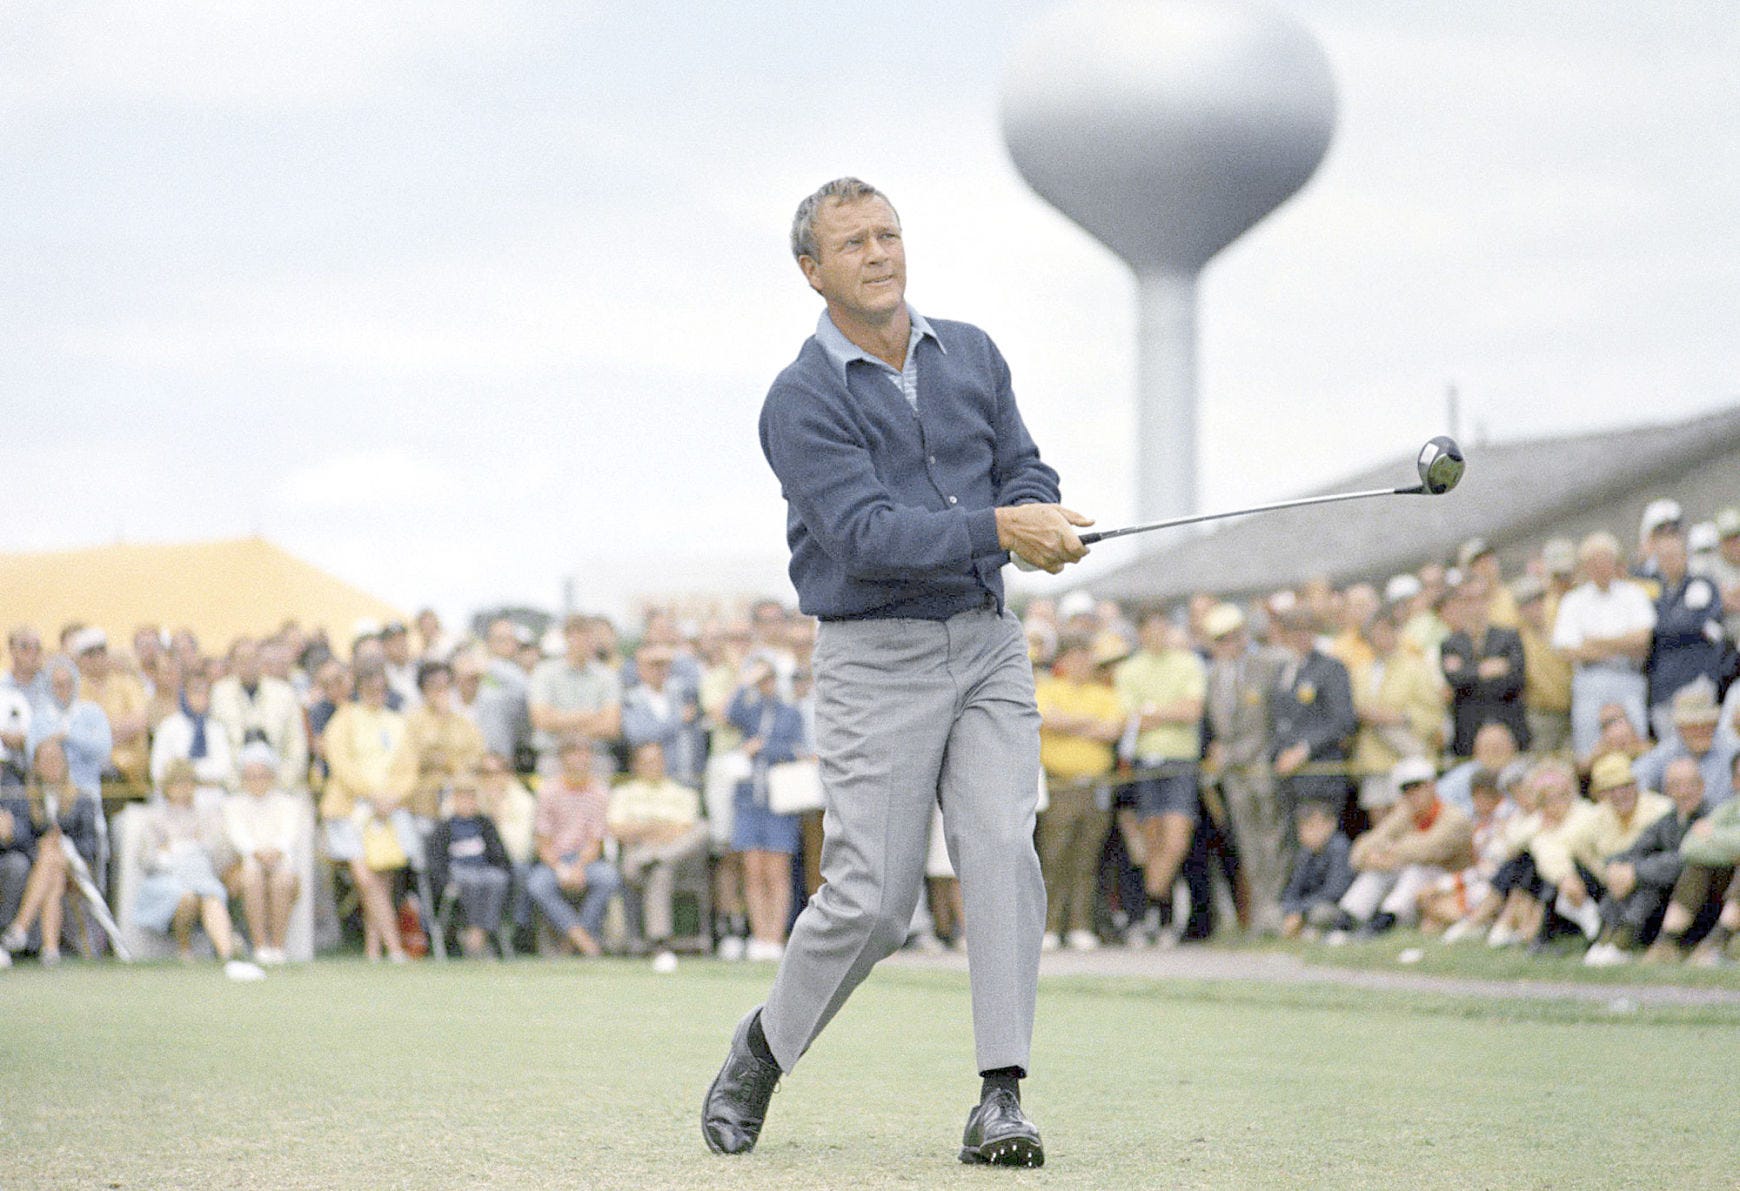 Arnold Palmer, Latrobe native and King of the PGA tour, dies at 87 pic